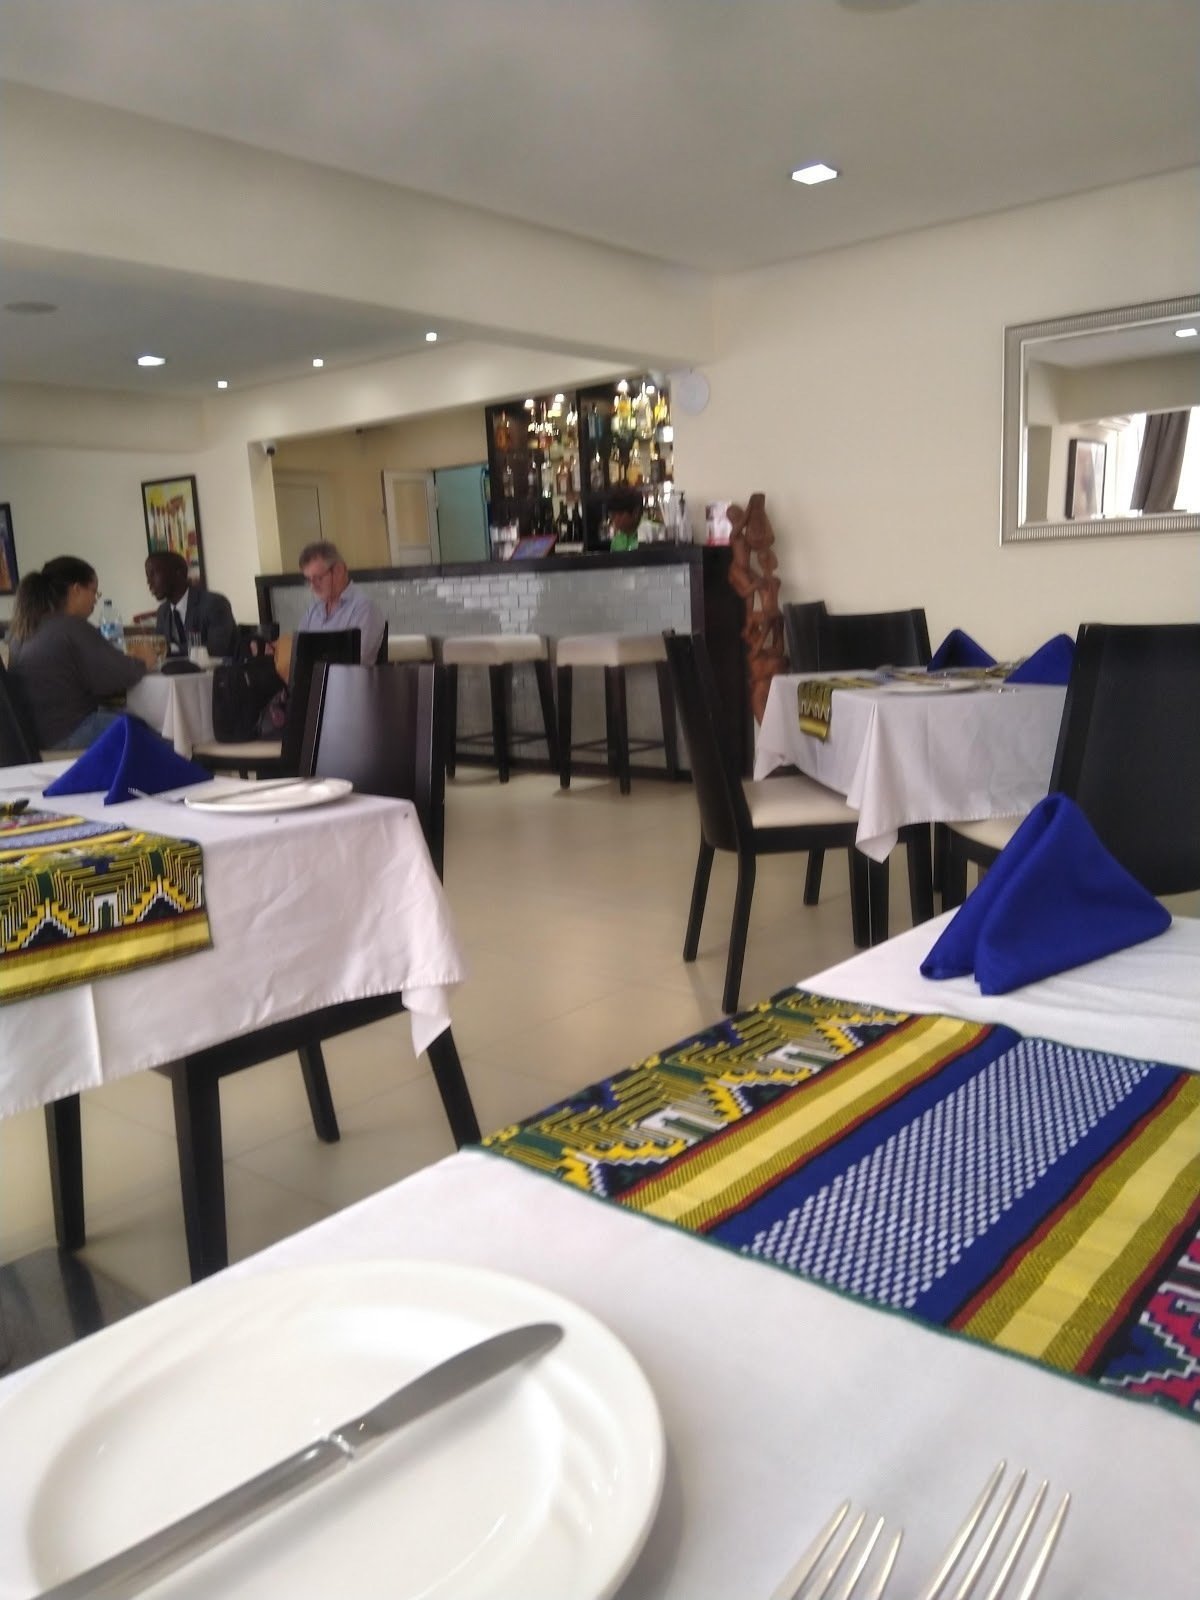 <span class="translation_missing" title="translation missing: en.meta.location_title, location_name: New Brookfields Hotel, city: Freetown">Location Title</span>